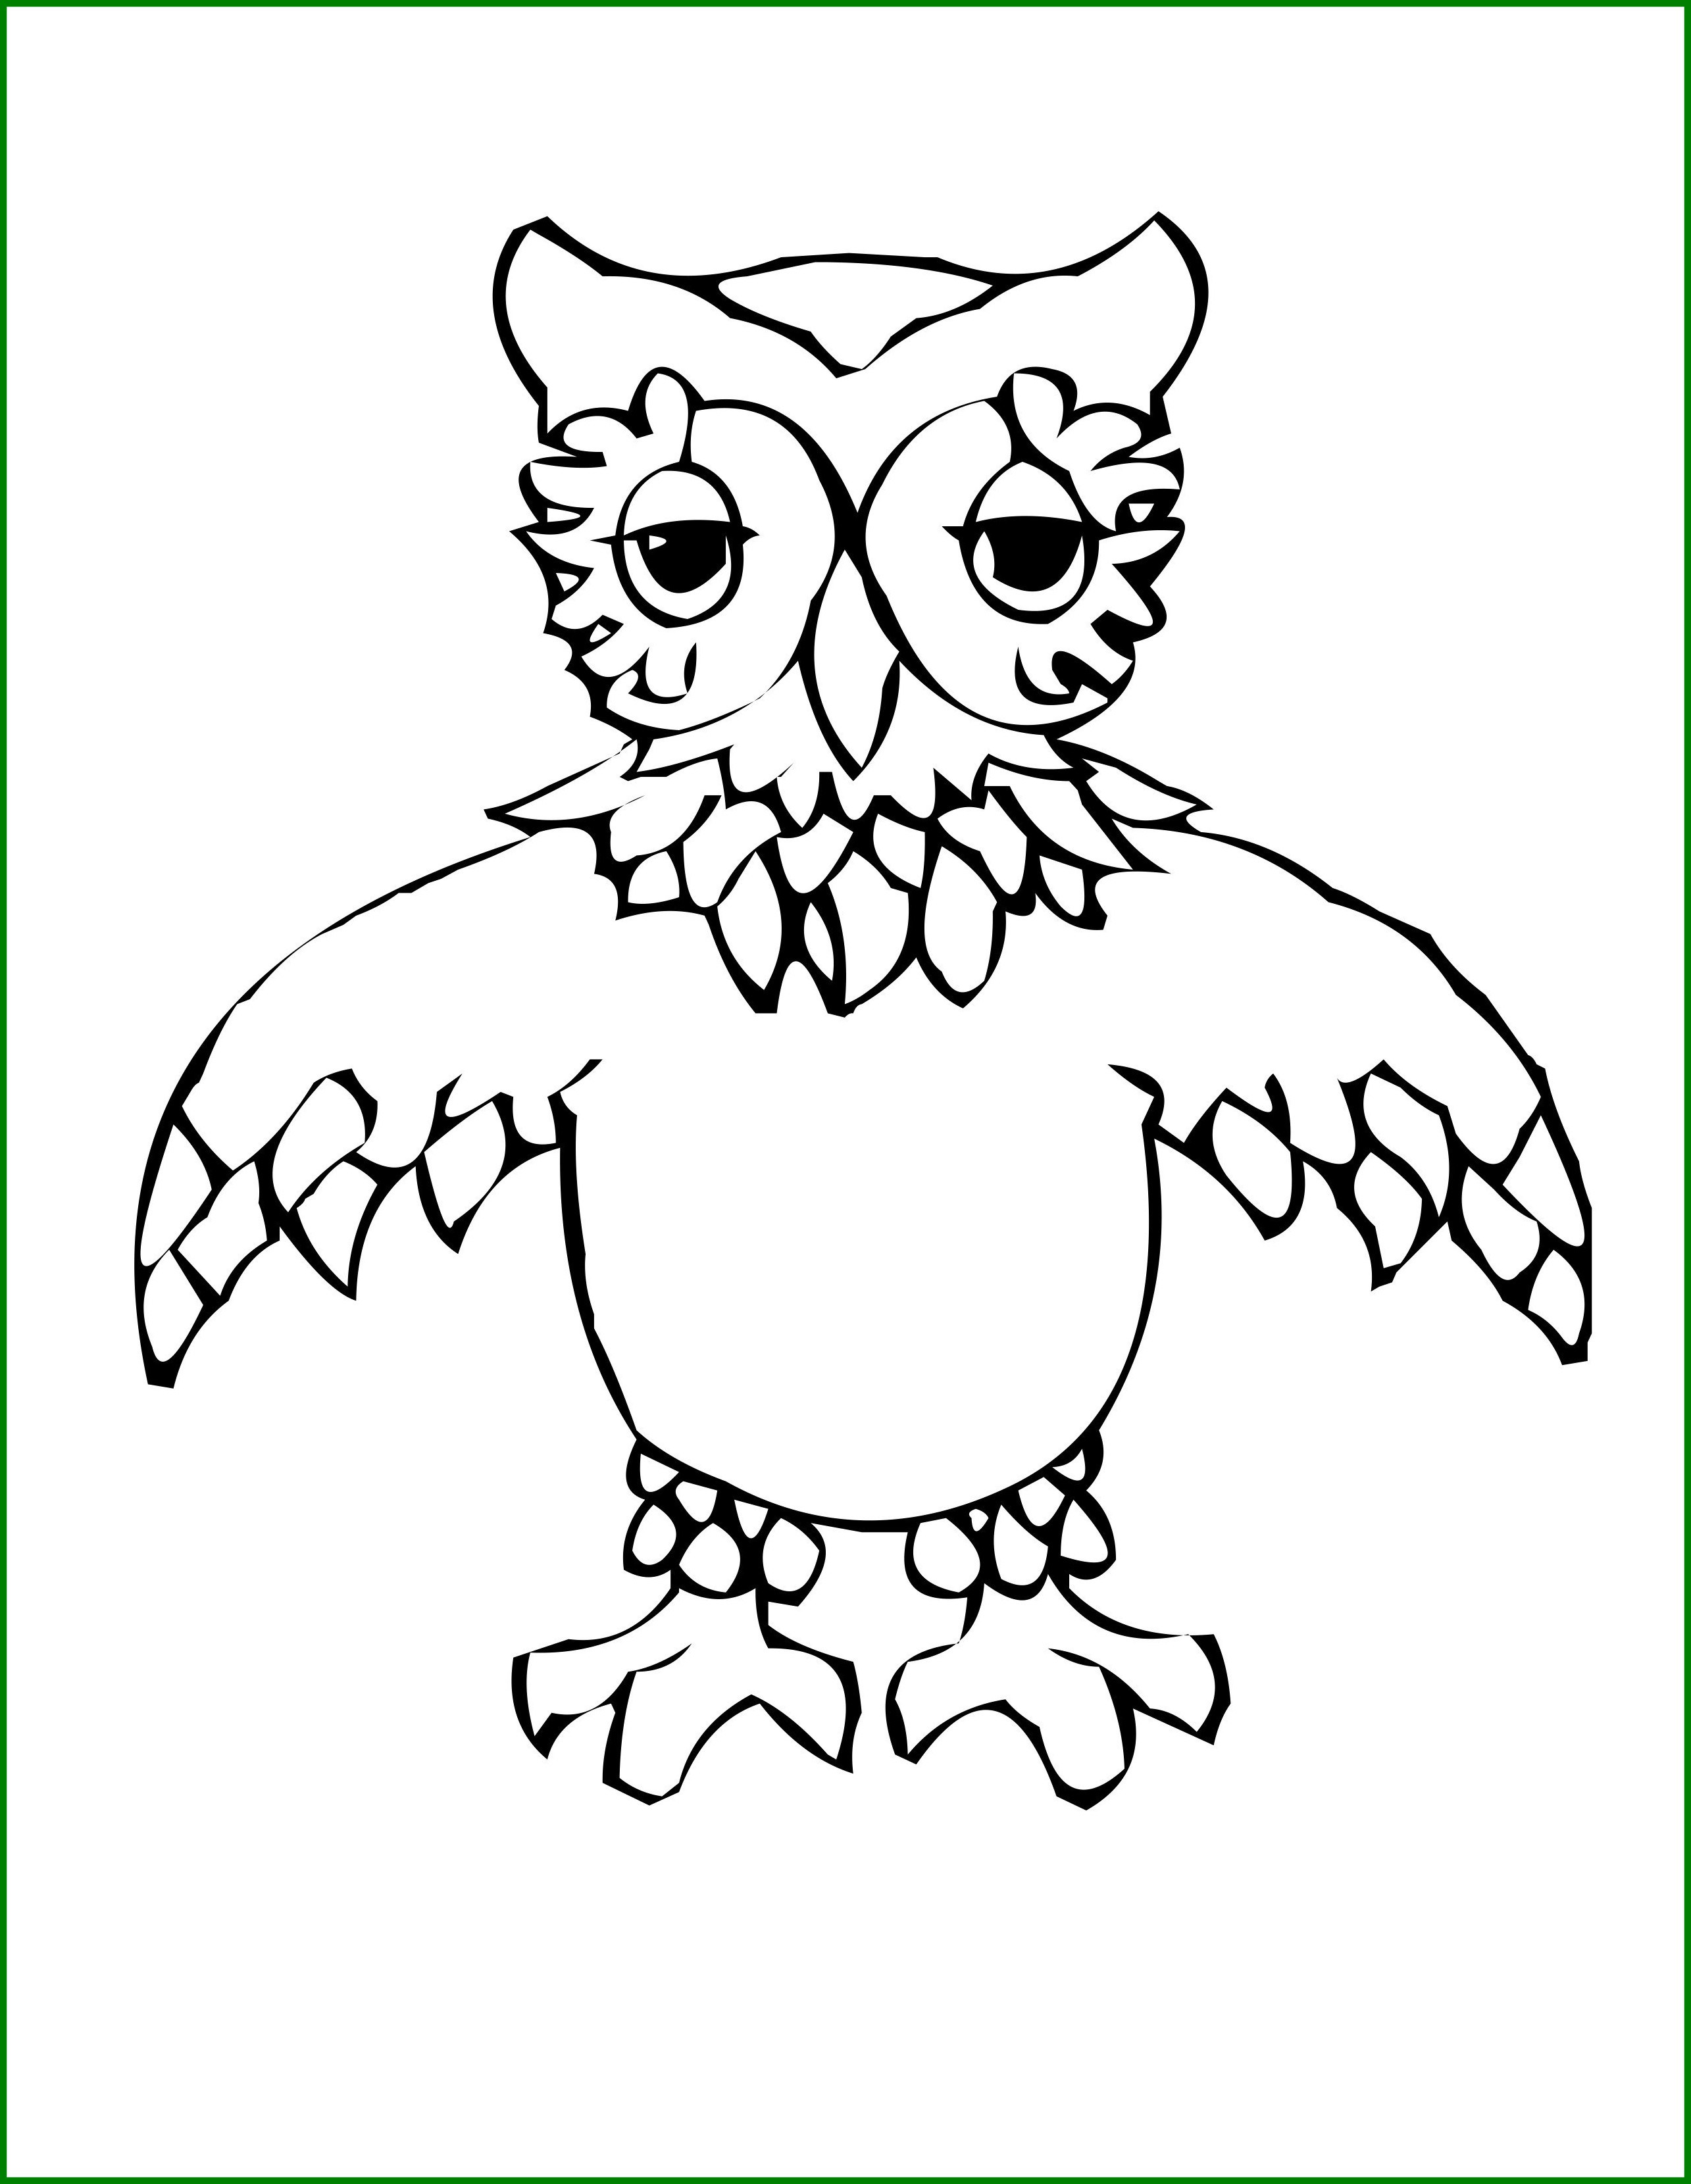 Love Bird Coloring Pages at GetDrawings.com | Free for personal use